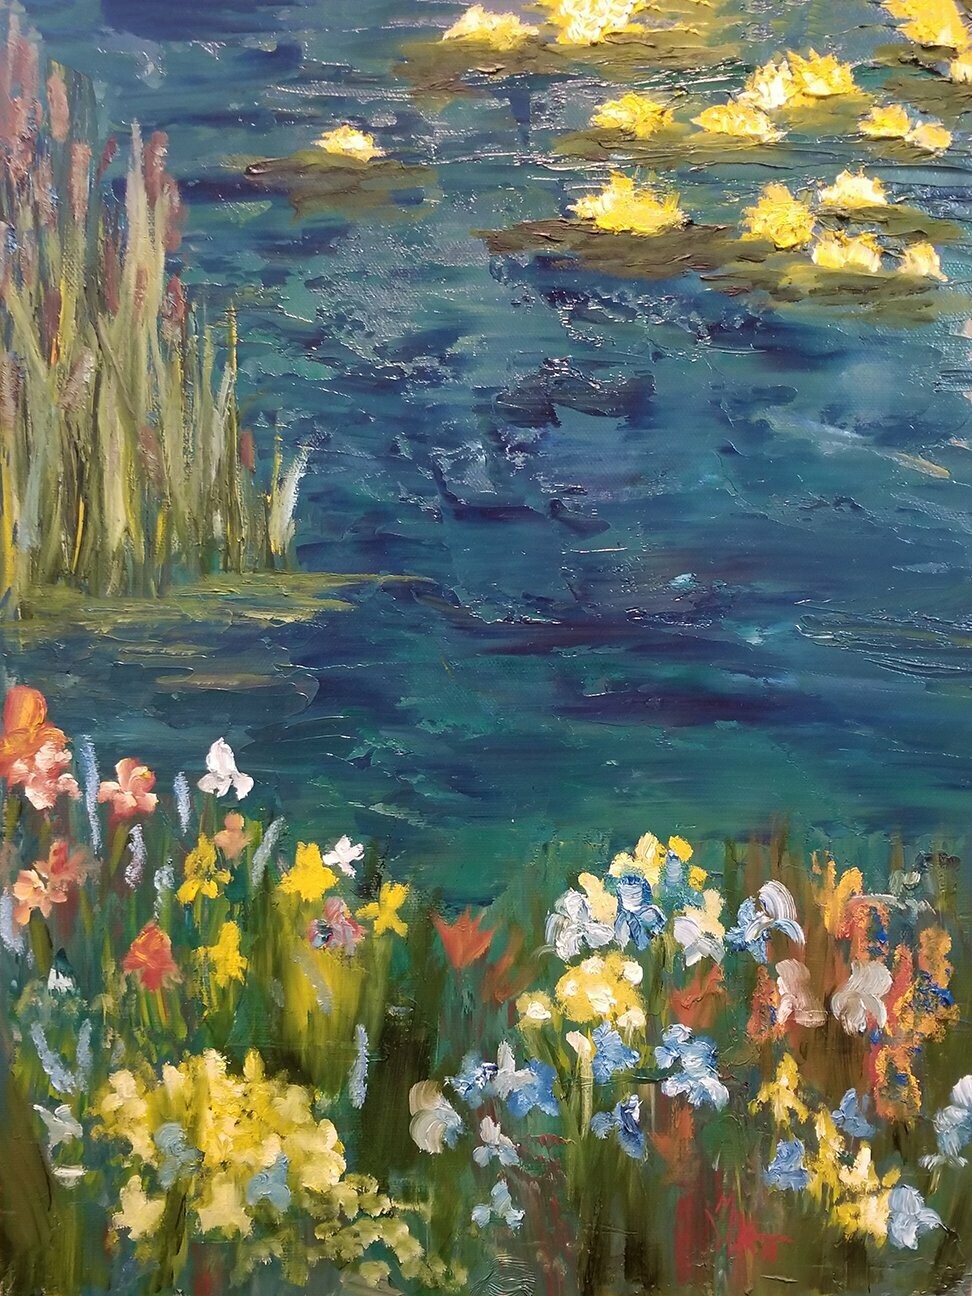 "Lily Pond" by Monica Wells